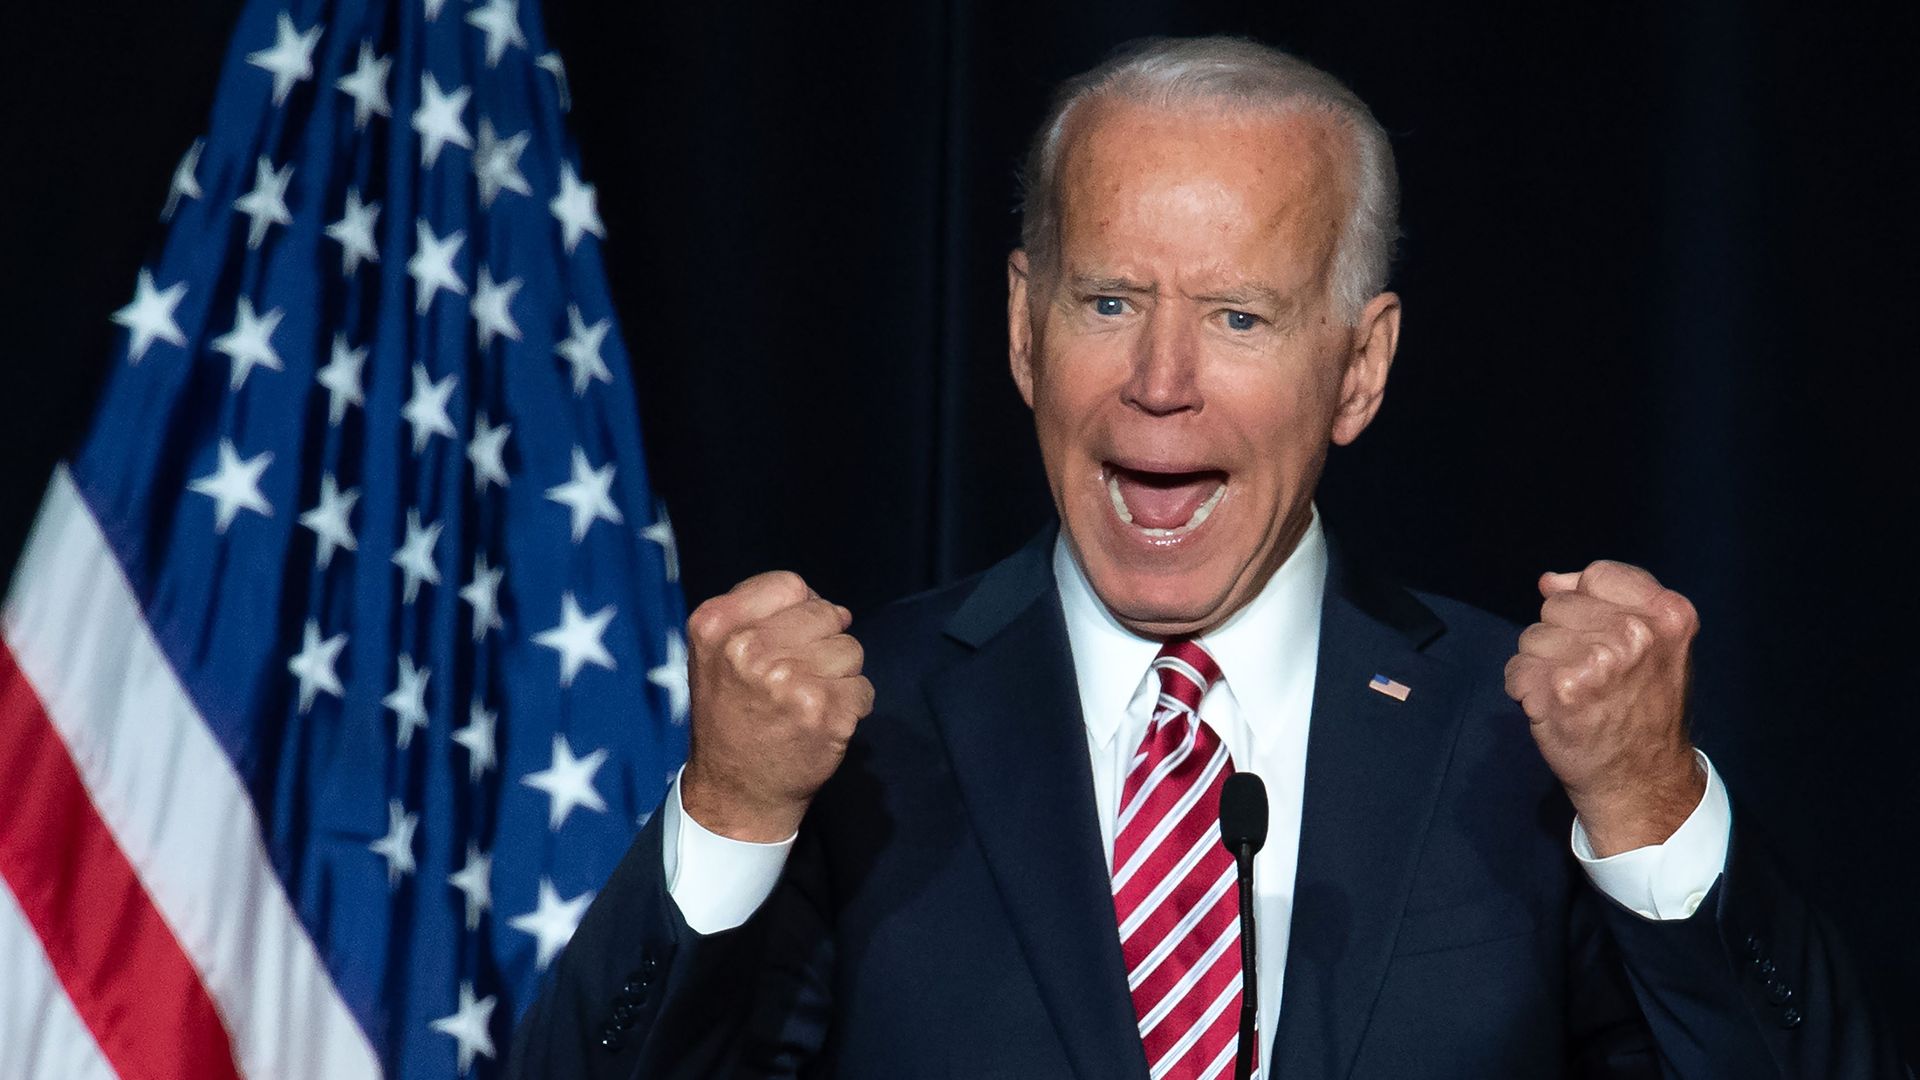 Former Vice President Joe Biden is an early front-runner for the Democratic presidential nomination in the latest ABC News/Washington Post poll.